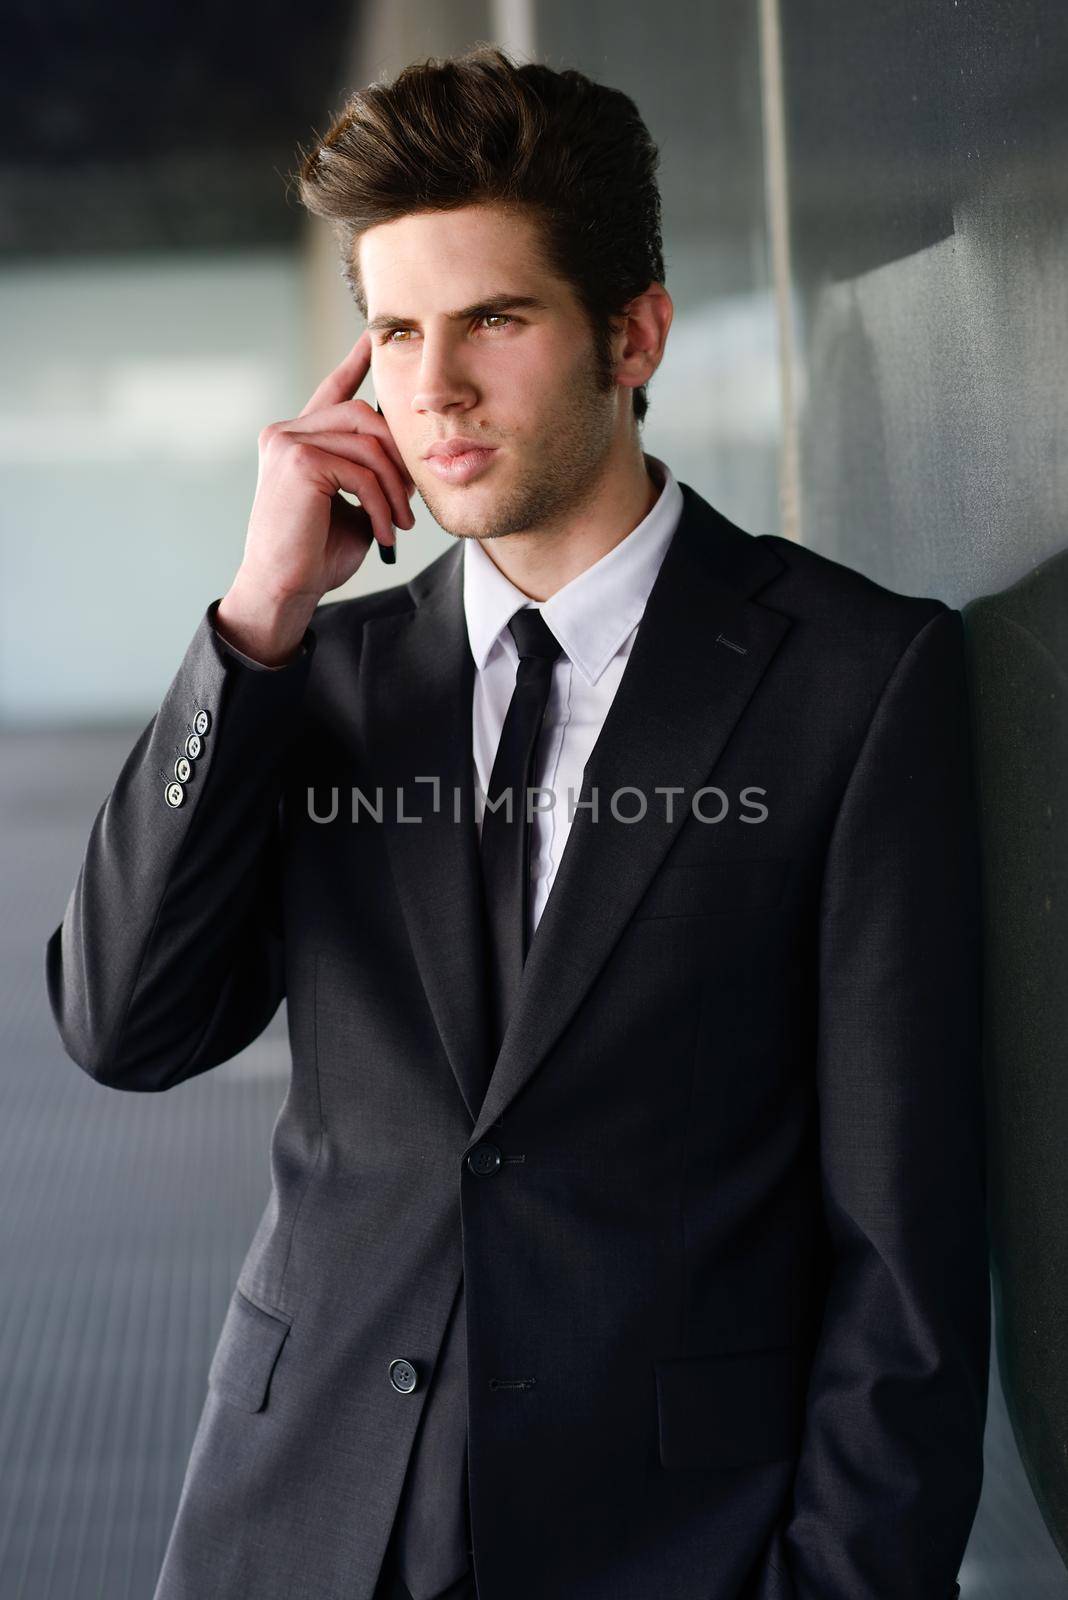 Attractive young businessman on the phone in an office building by javiindy